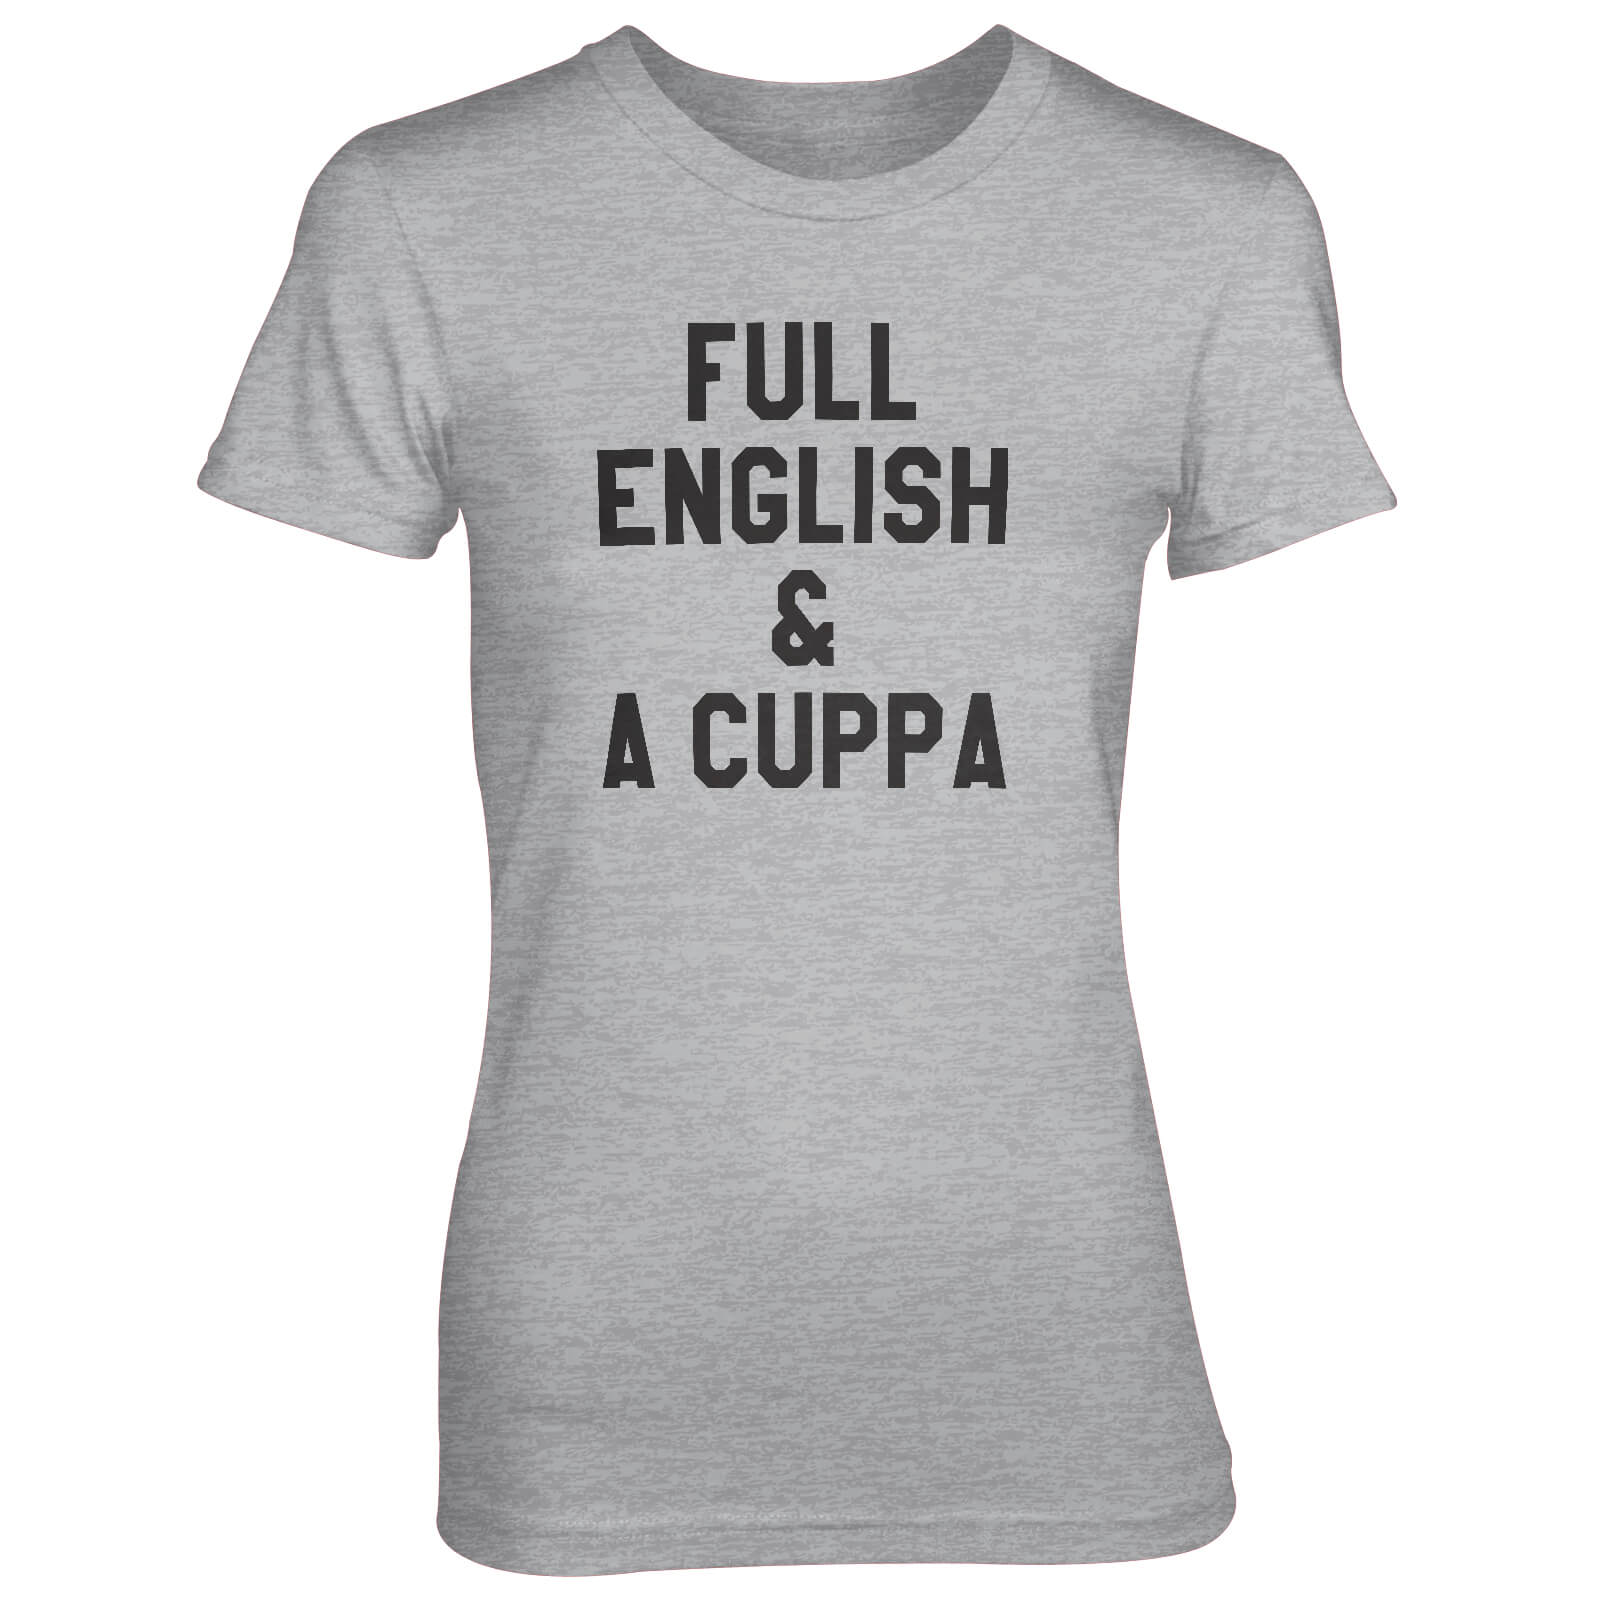 Full English And A Cuppa Women's Grey T-Shirt - S - Grey